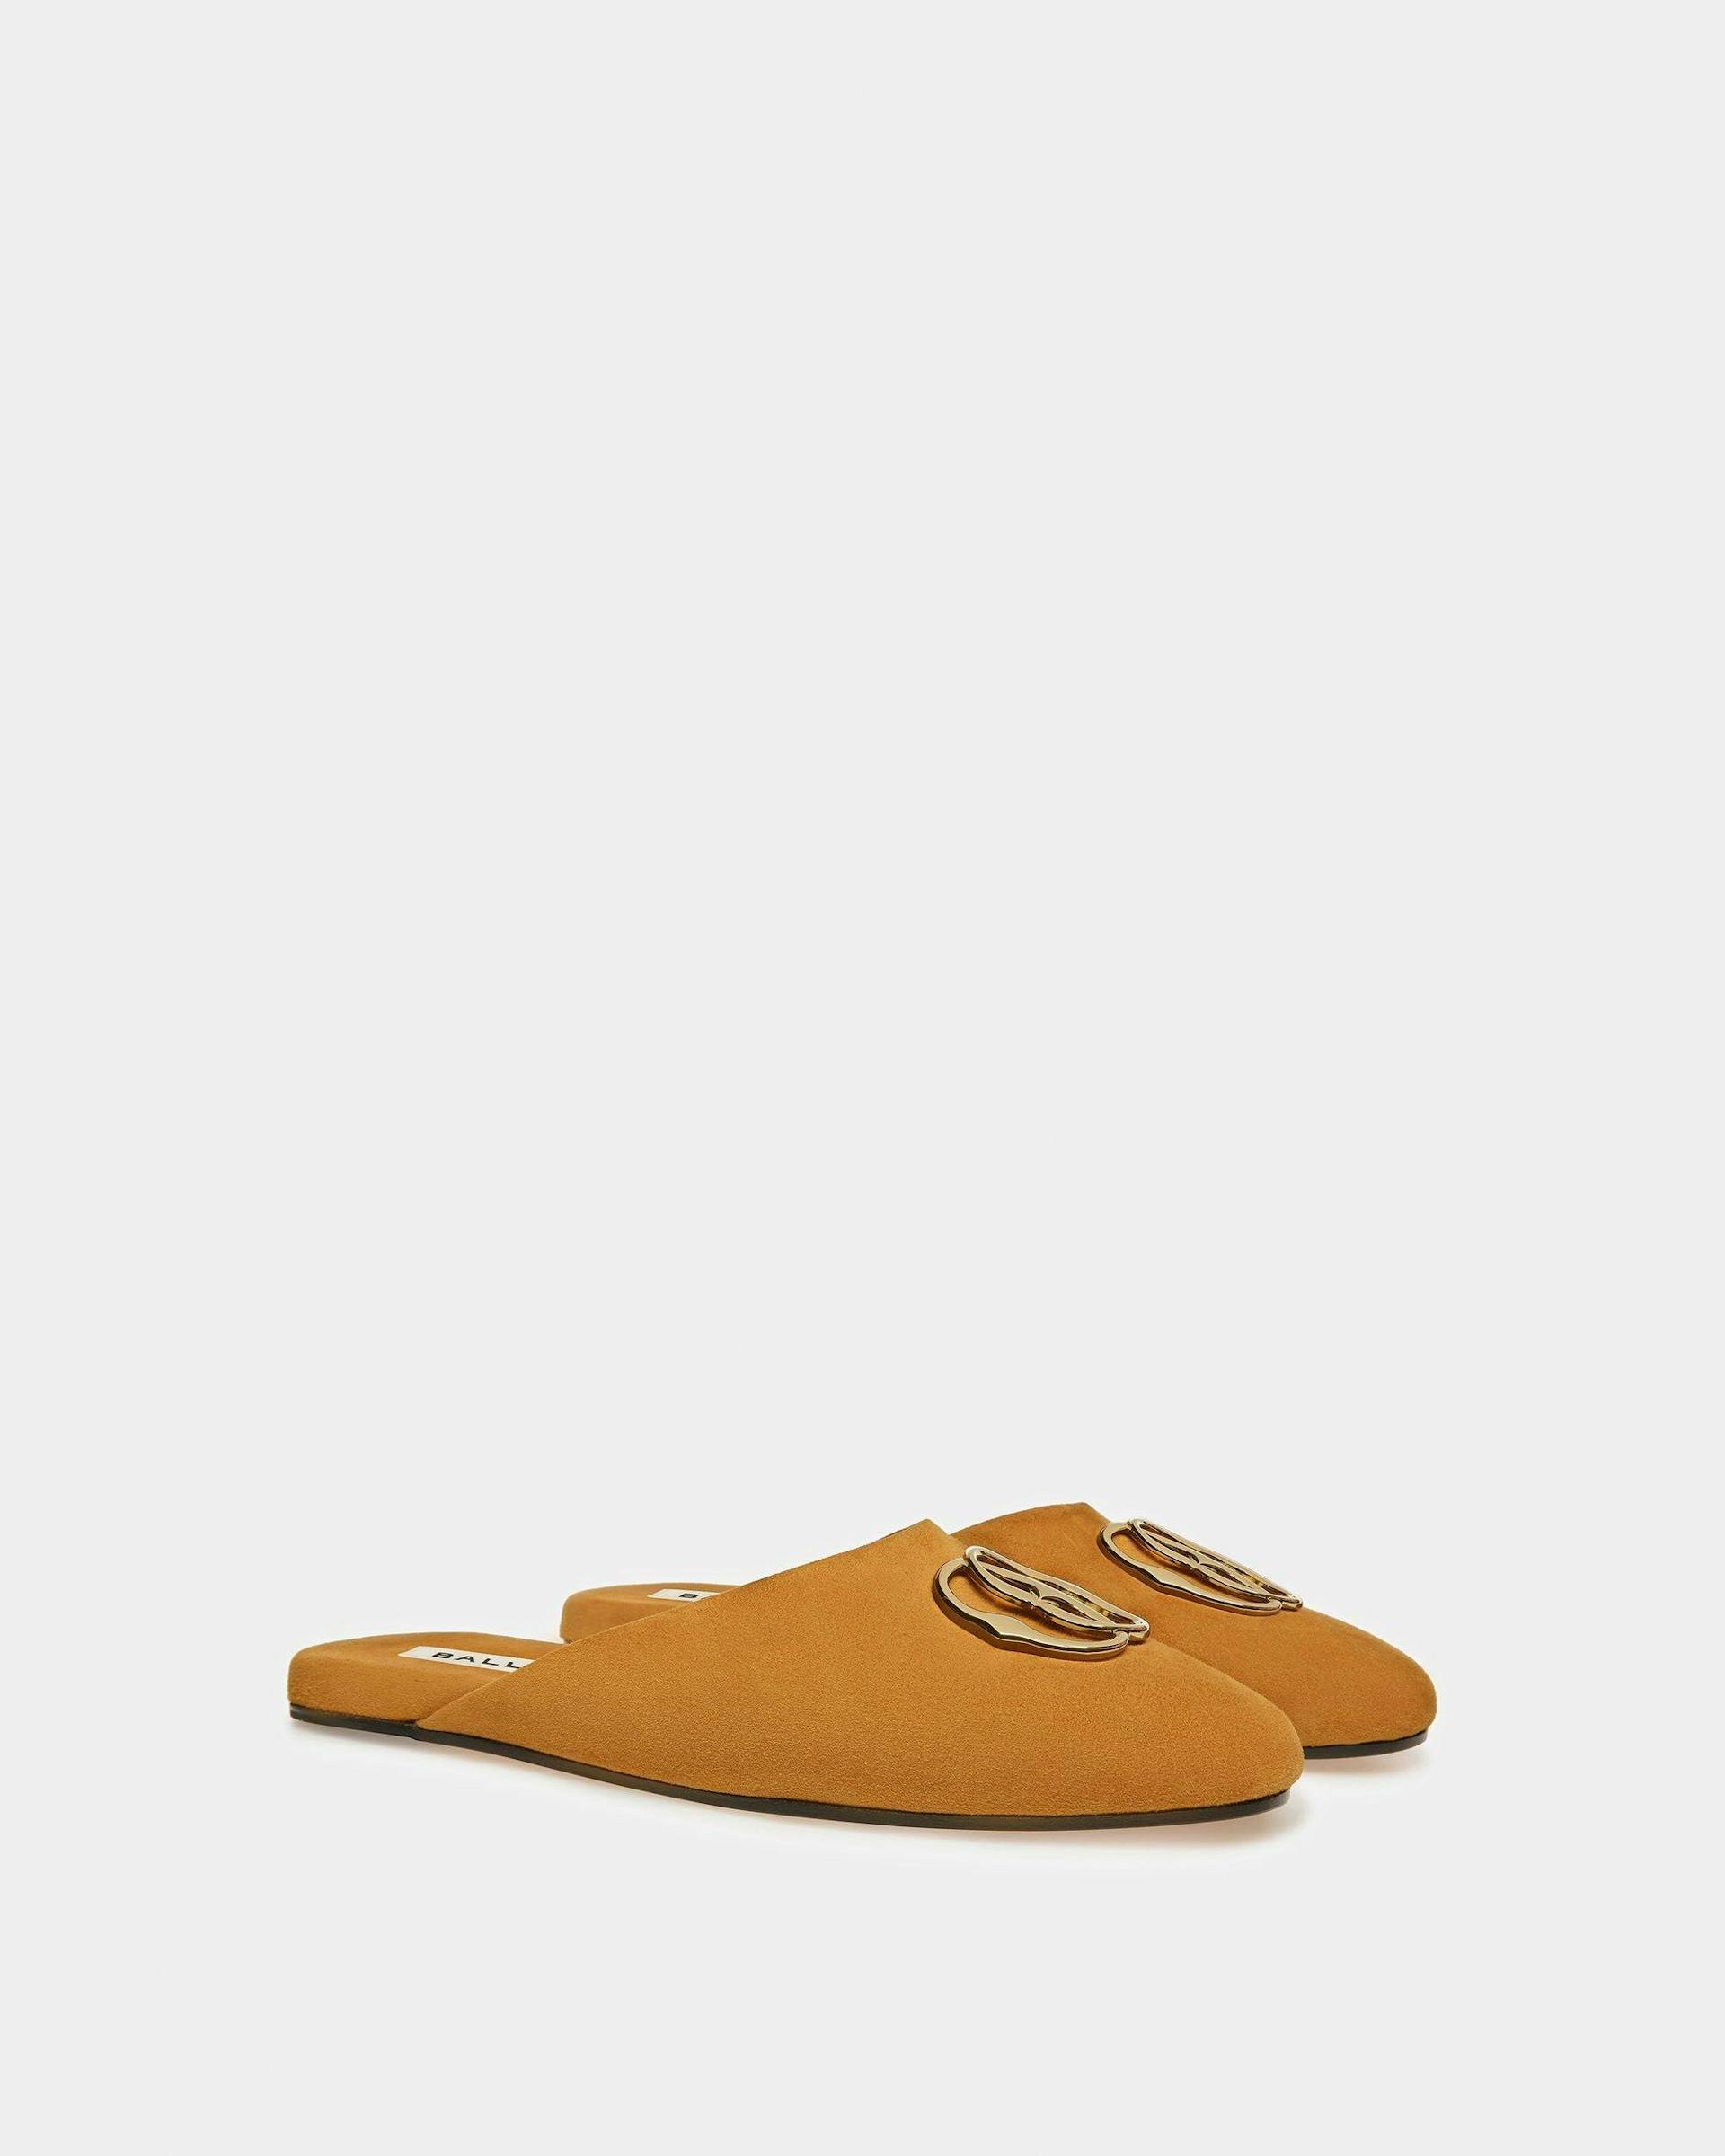 Emblem Loafer In Suede - Women's - Bally - 08